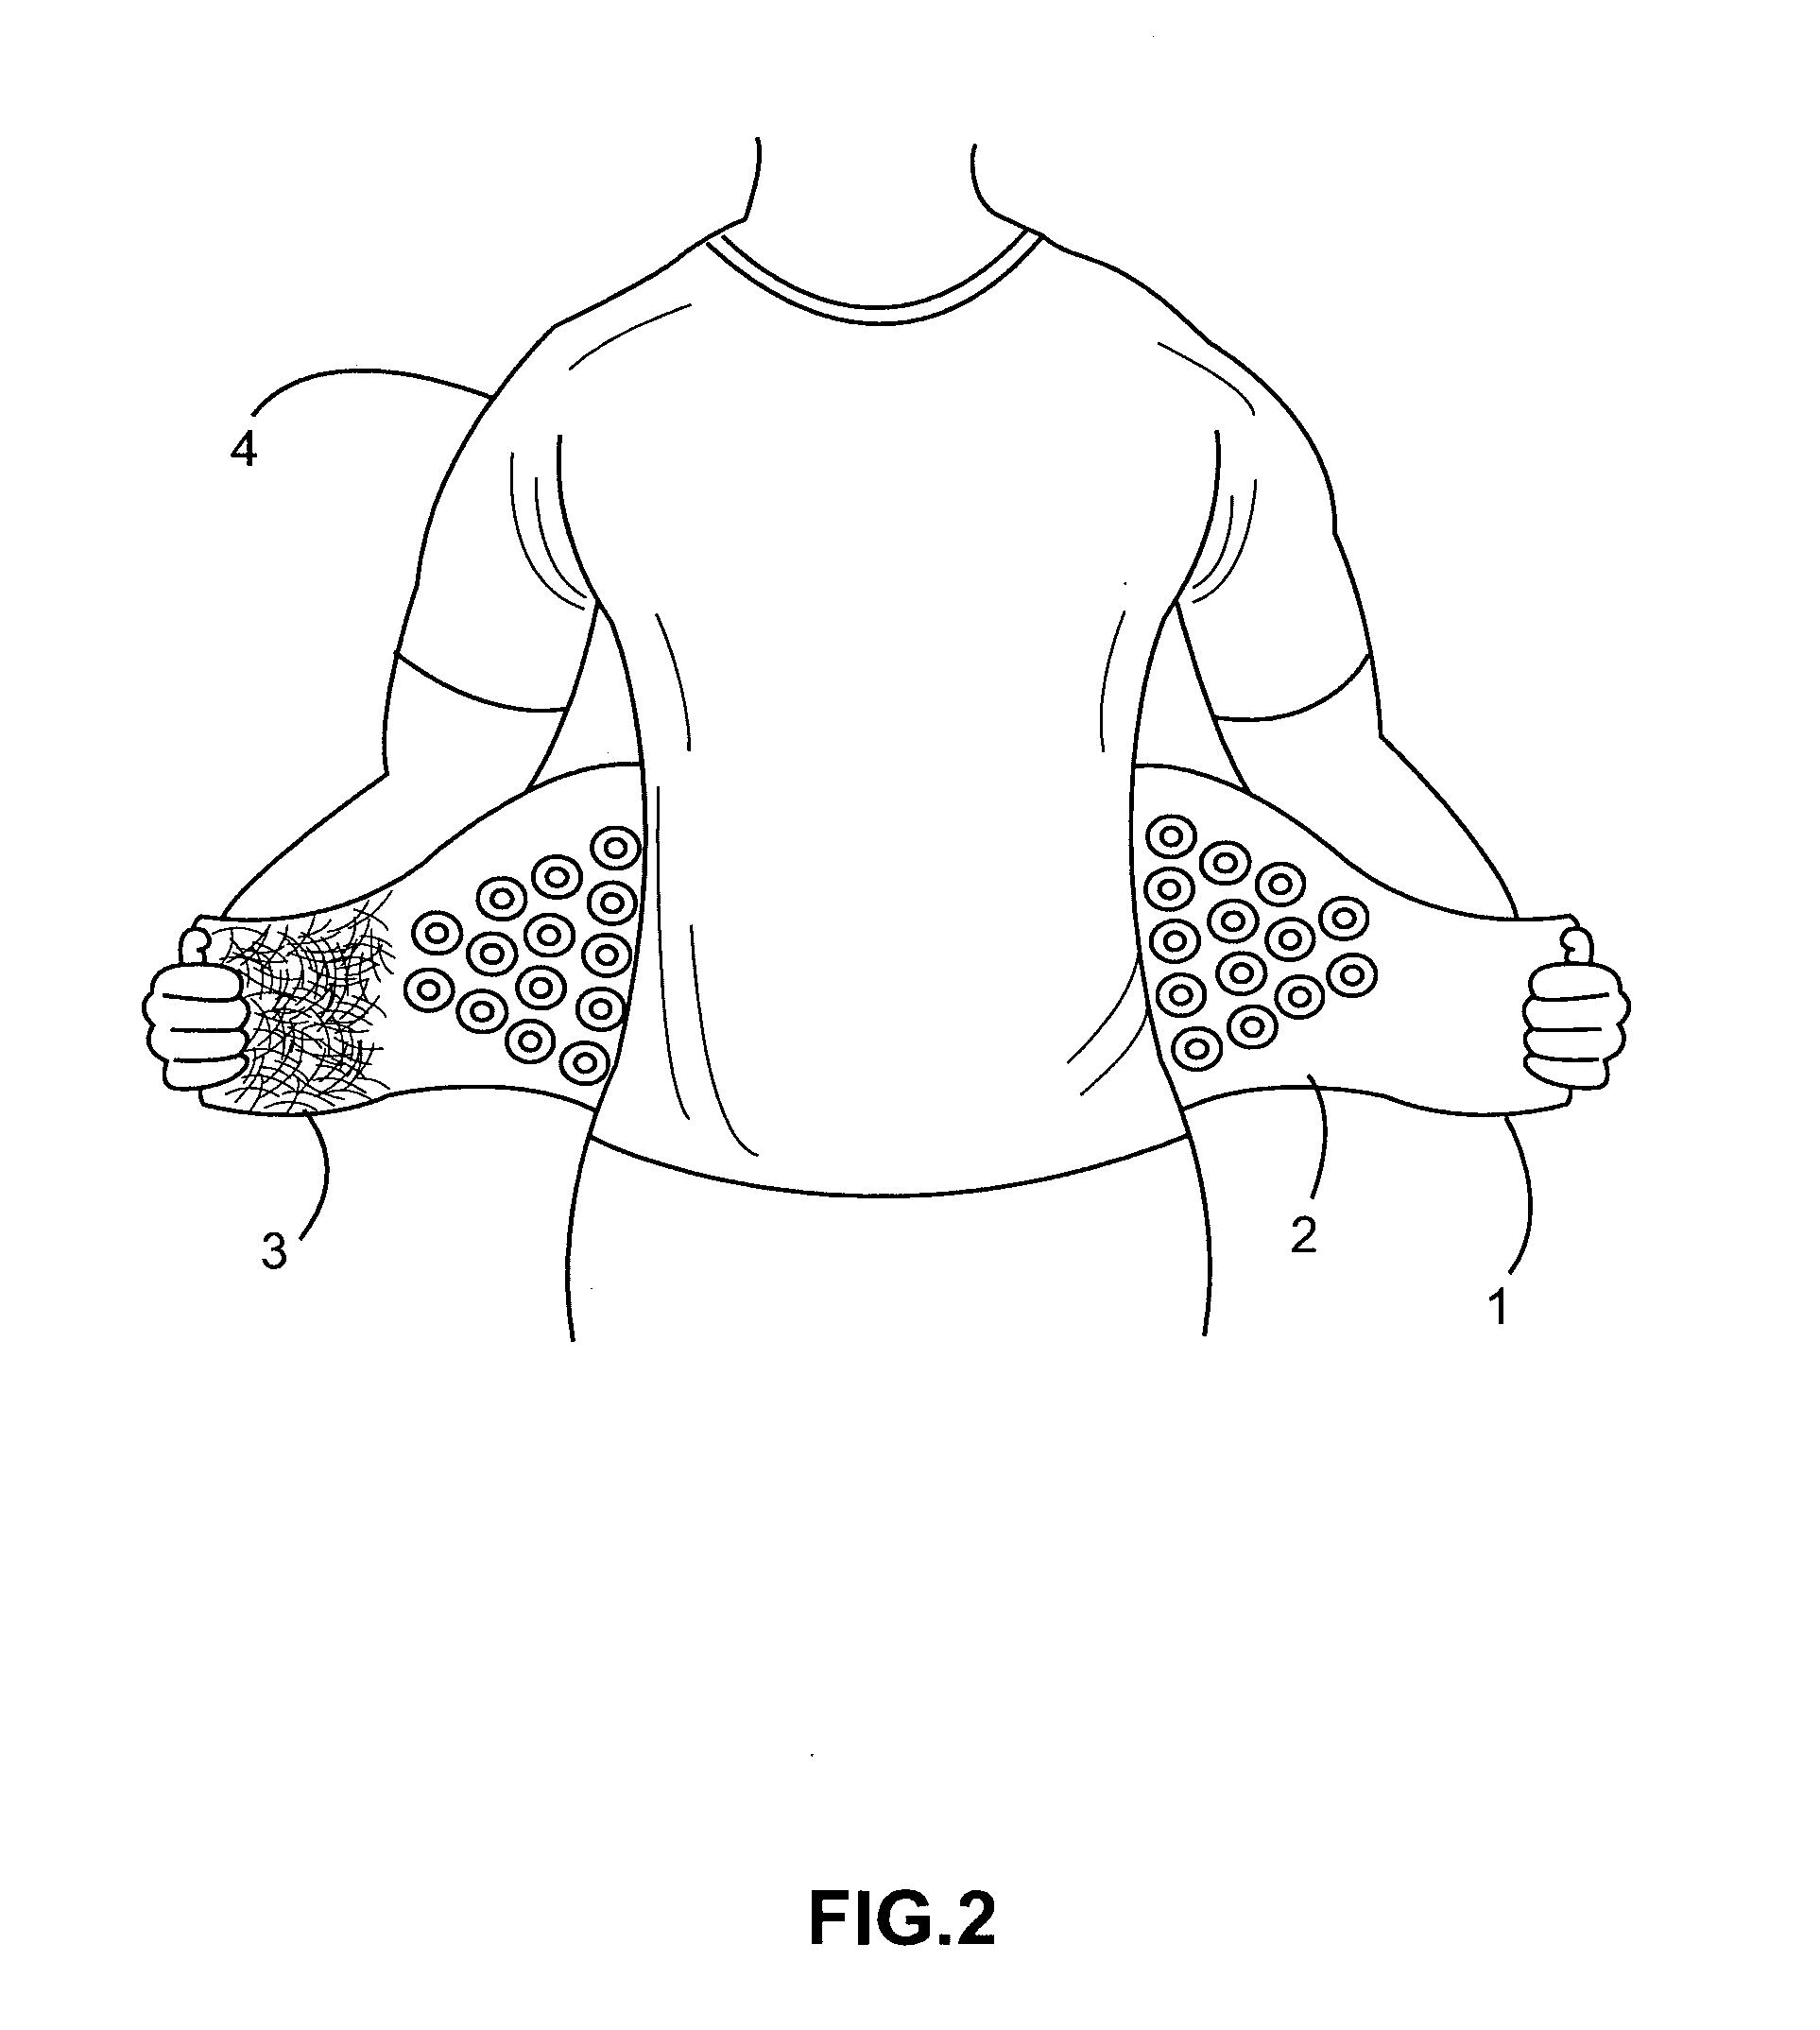 Portable, HANDS-FREE, PRE-CALIBRATED and WEARABLE Laser brace/wrap type clinical-strength medical device/apparatus, with embedded Low-Level-Laser-Therapy (LLLT), providing for a new method/modality for Pain relief in the form of orthopedic LASERWRAPS, from joint related musculoskeletal pain caused by joint related illnesses including - TENNIS ELBOW, CARPEL-TUNNEL,  ARTHRITIS, OSTEOPEROSIS, PLANTAR FASCITIS, TENDONITIS (BACK PAIN, KNEE TENDONITIS, HAND TENDONITIS, ACHILLES TENDONITIS), SPORT INJURIES & BURSITIS